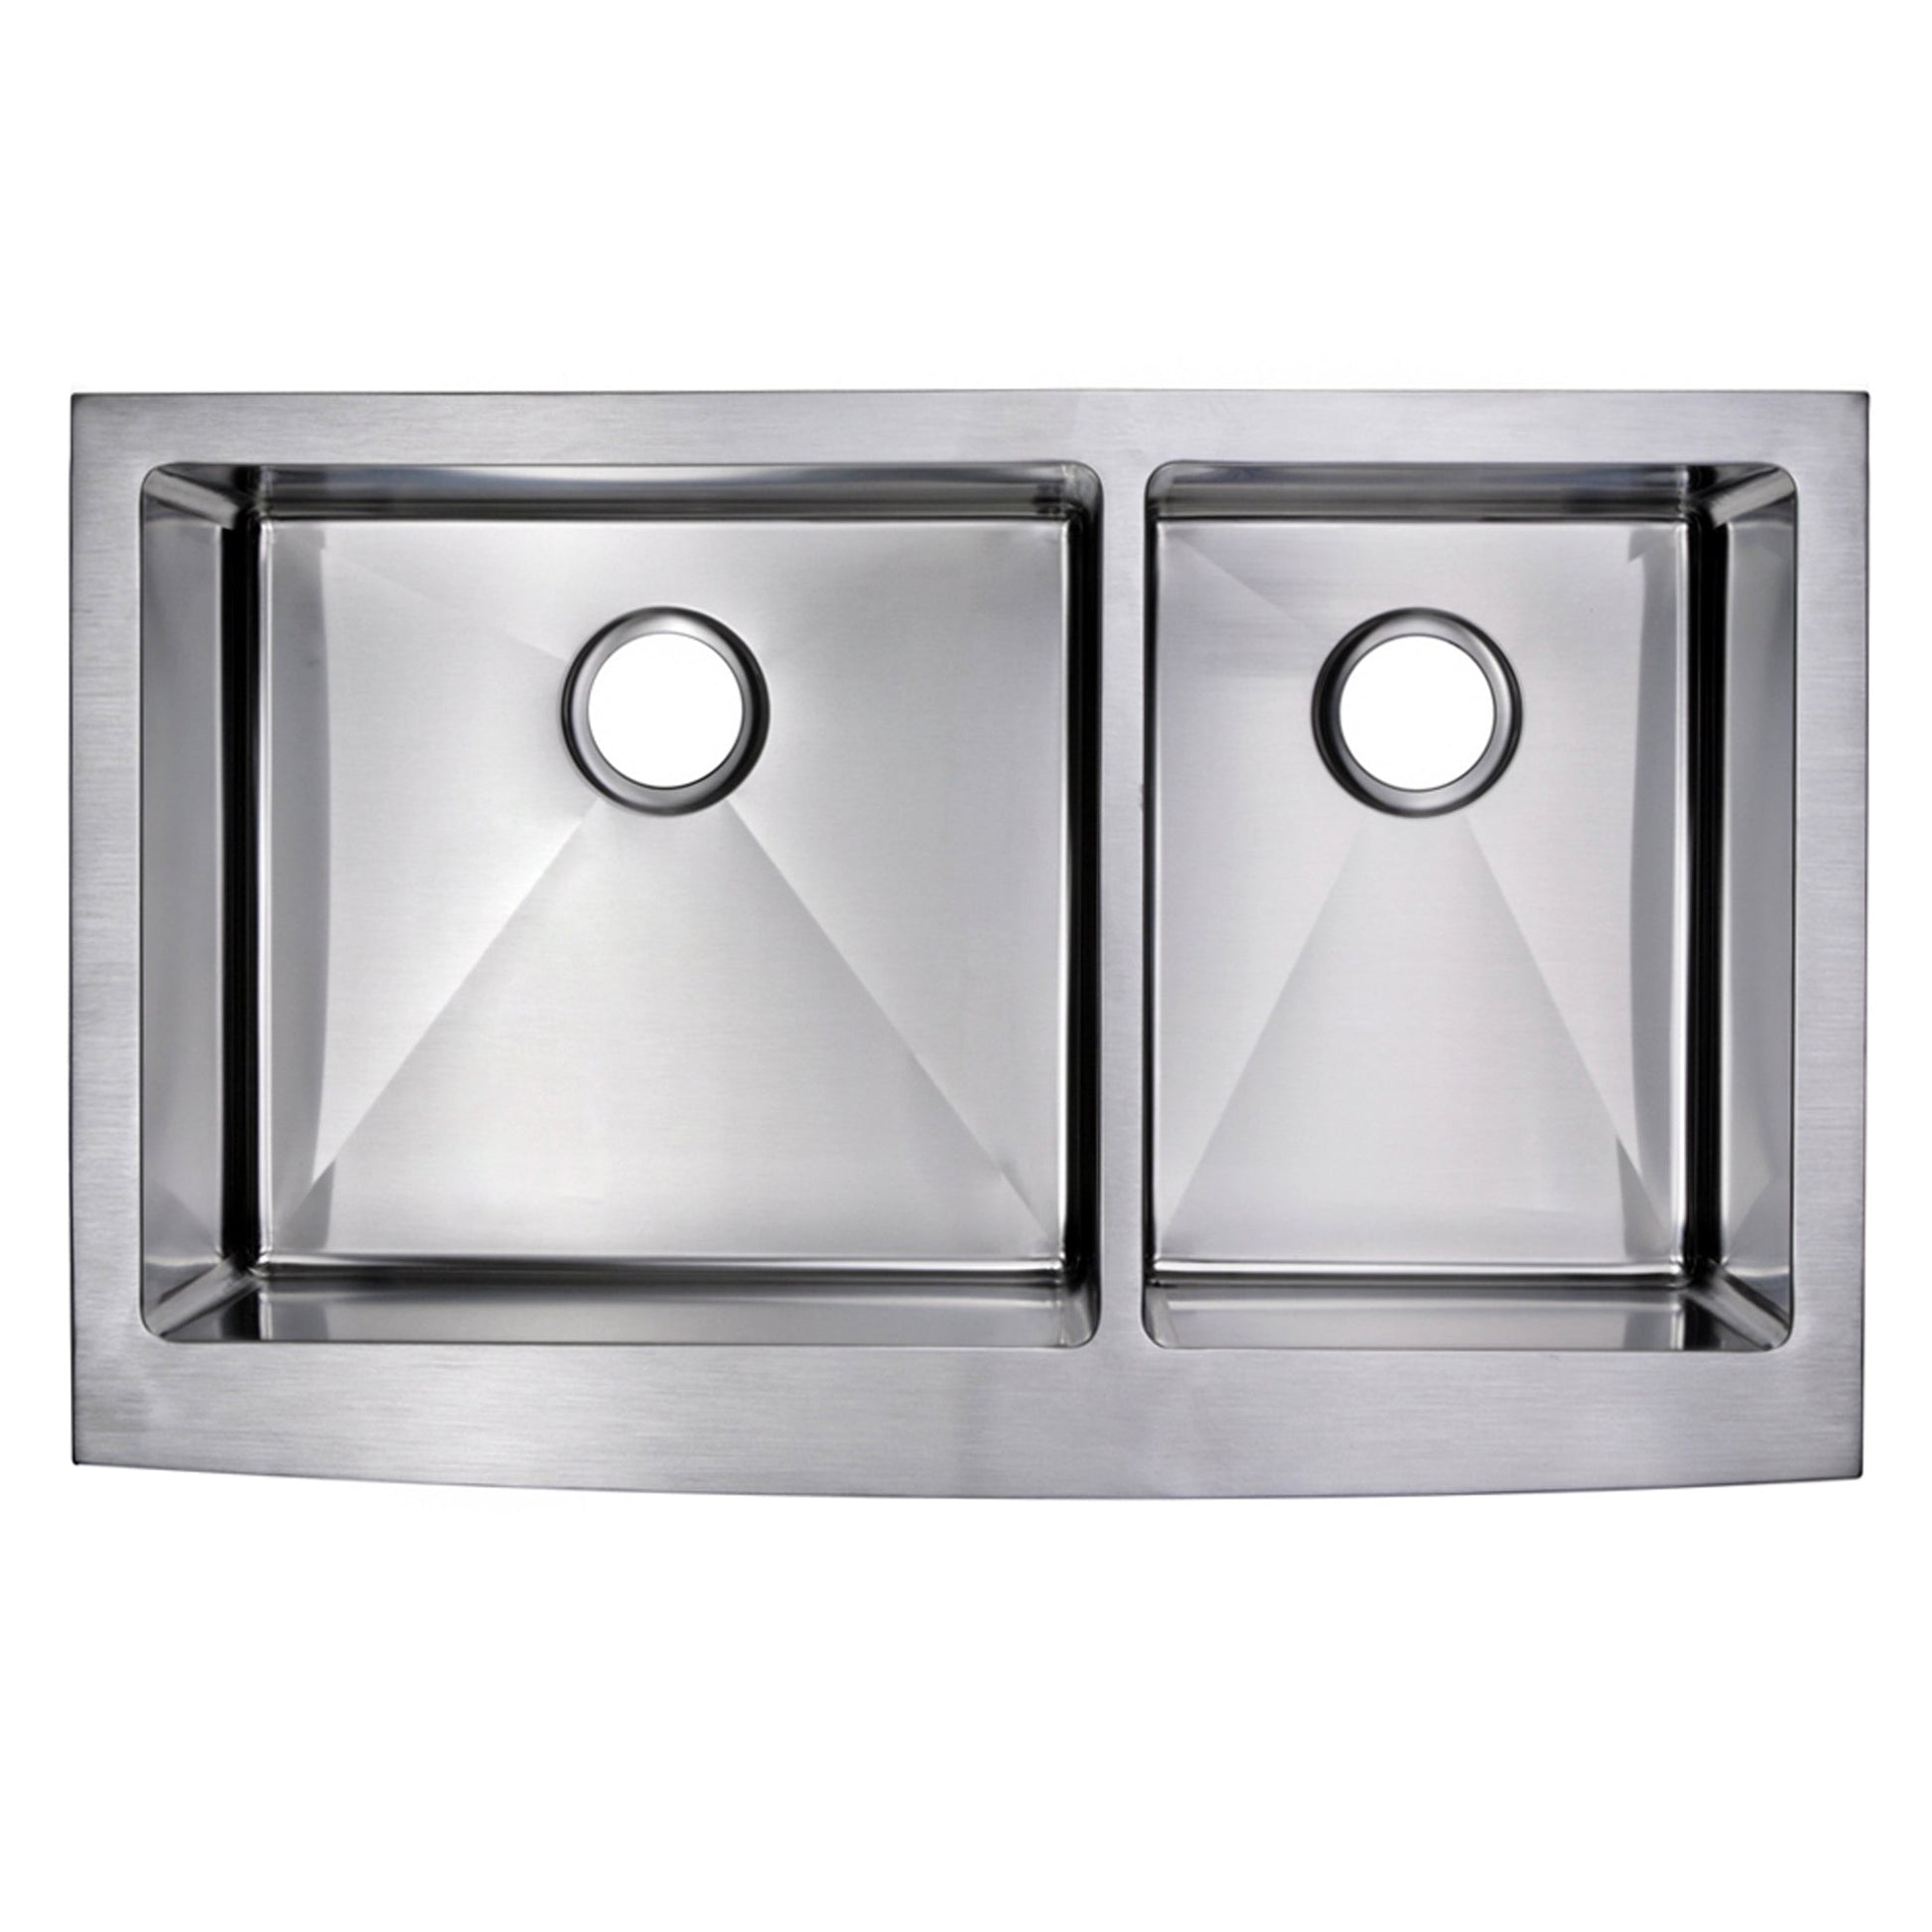 Water Creation Corner Radius 60/40 Double Bowl Stainless Steel Hand Made Apron Front 36 Inch X 22 Inch Sink With Drains, Strainers, And Bottom Grids